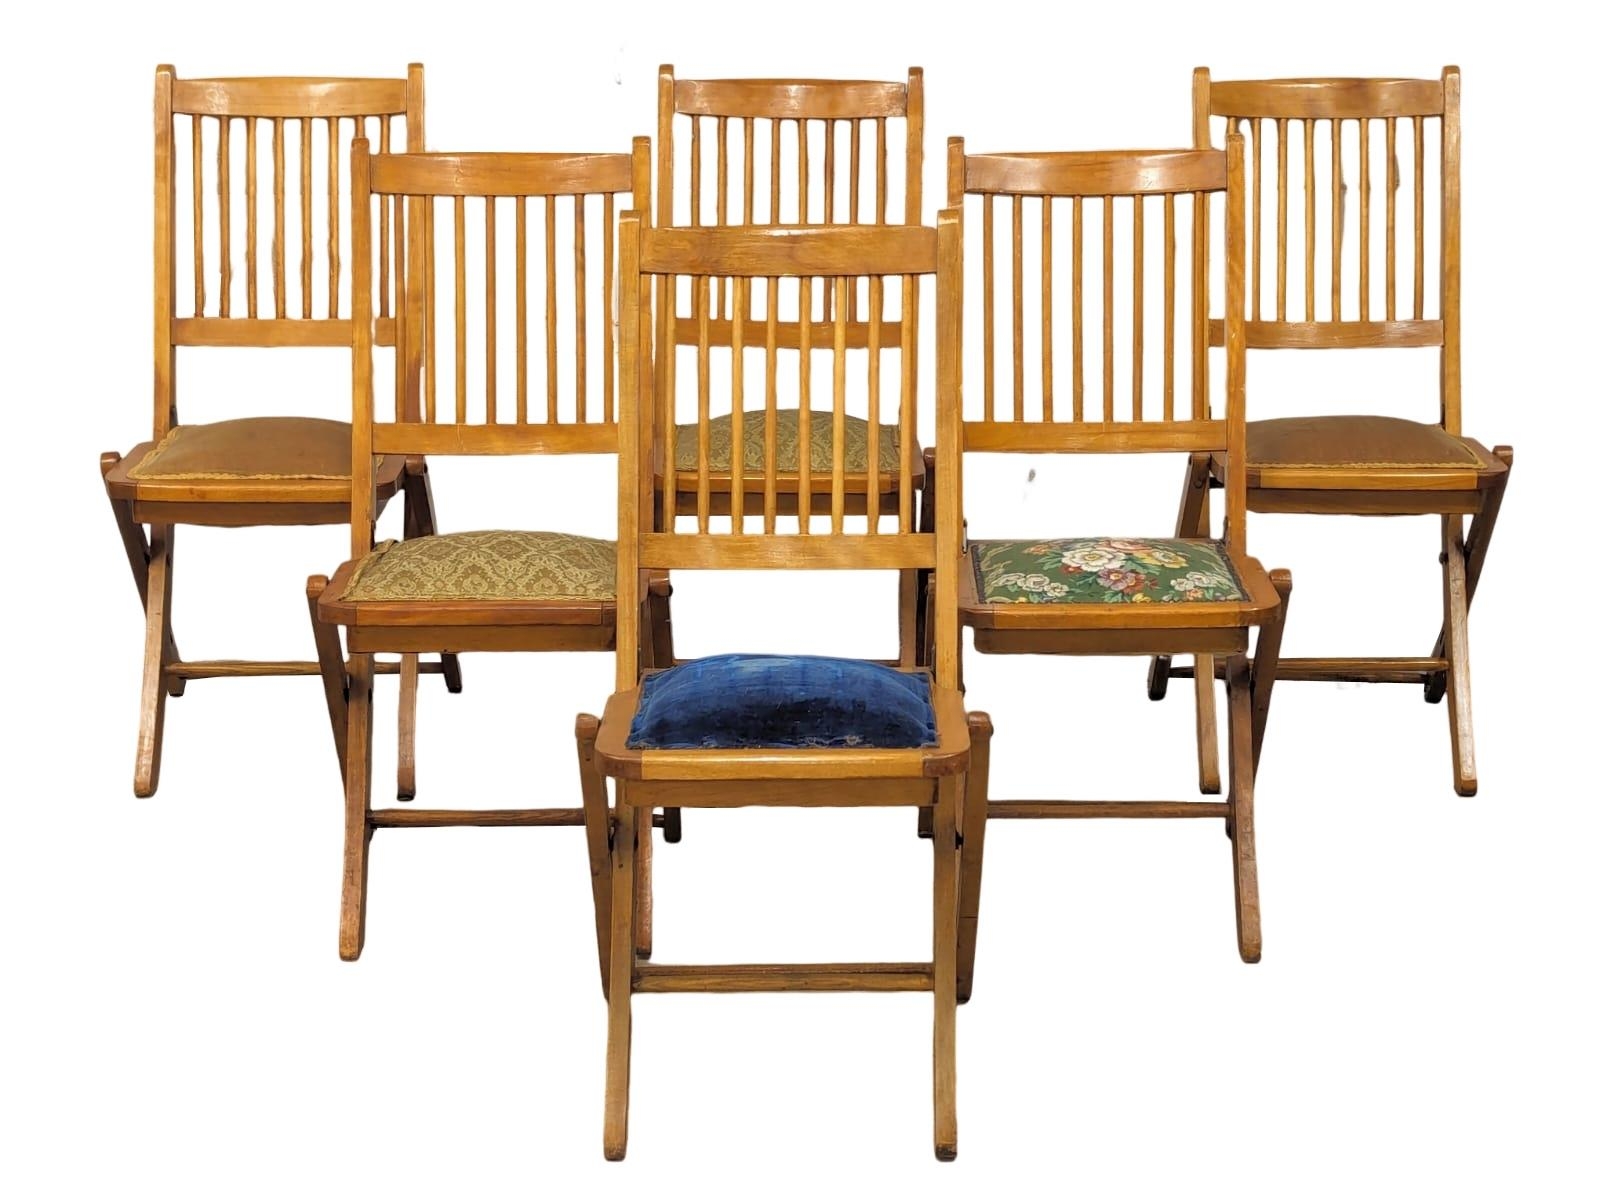 A set of 6 mid century folding chairs, stamped Todd Burns & Co Ltd Dublin